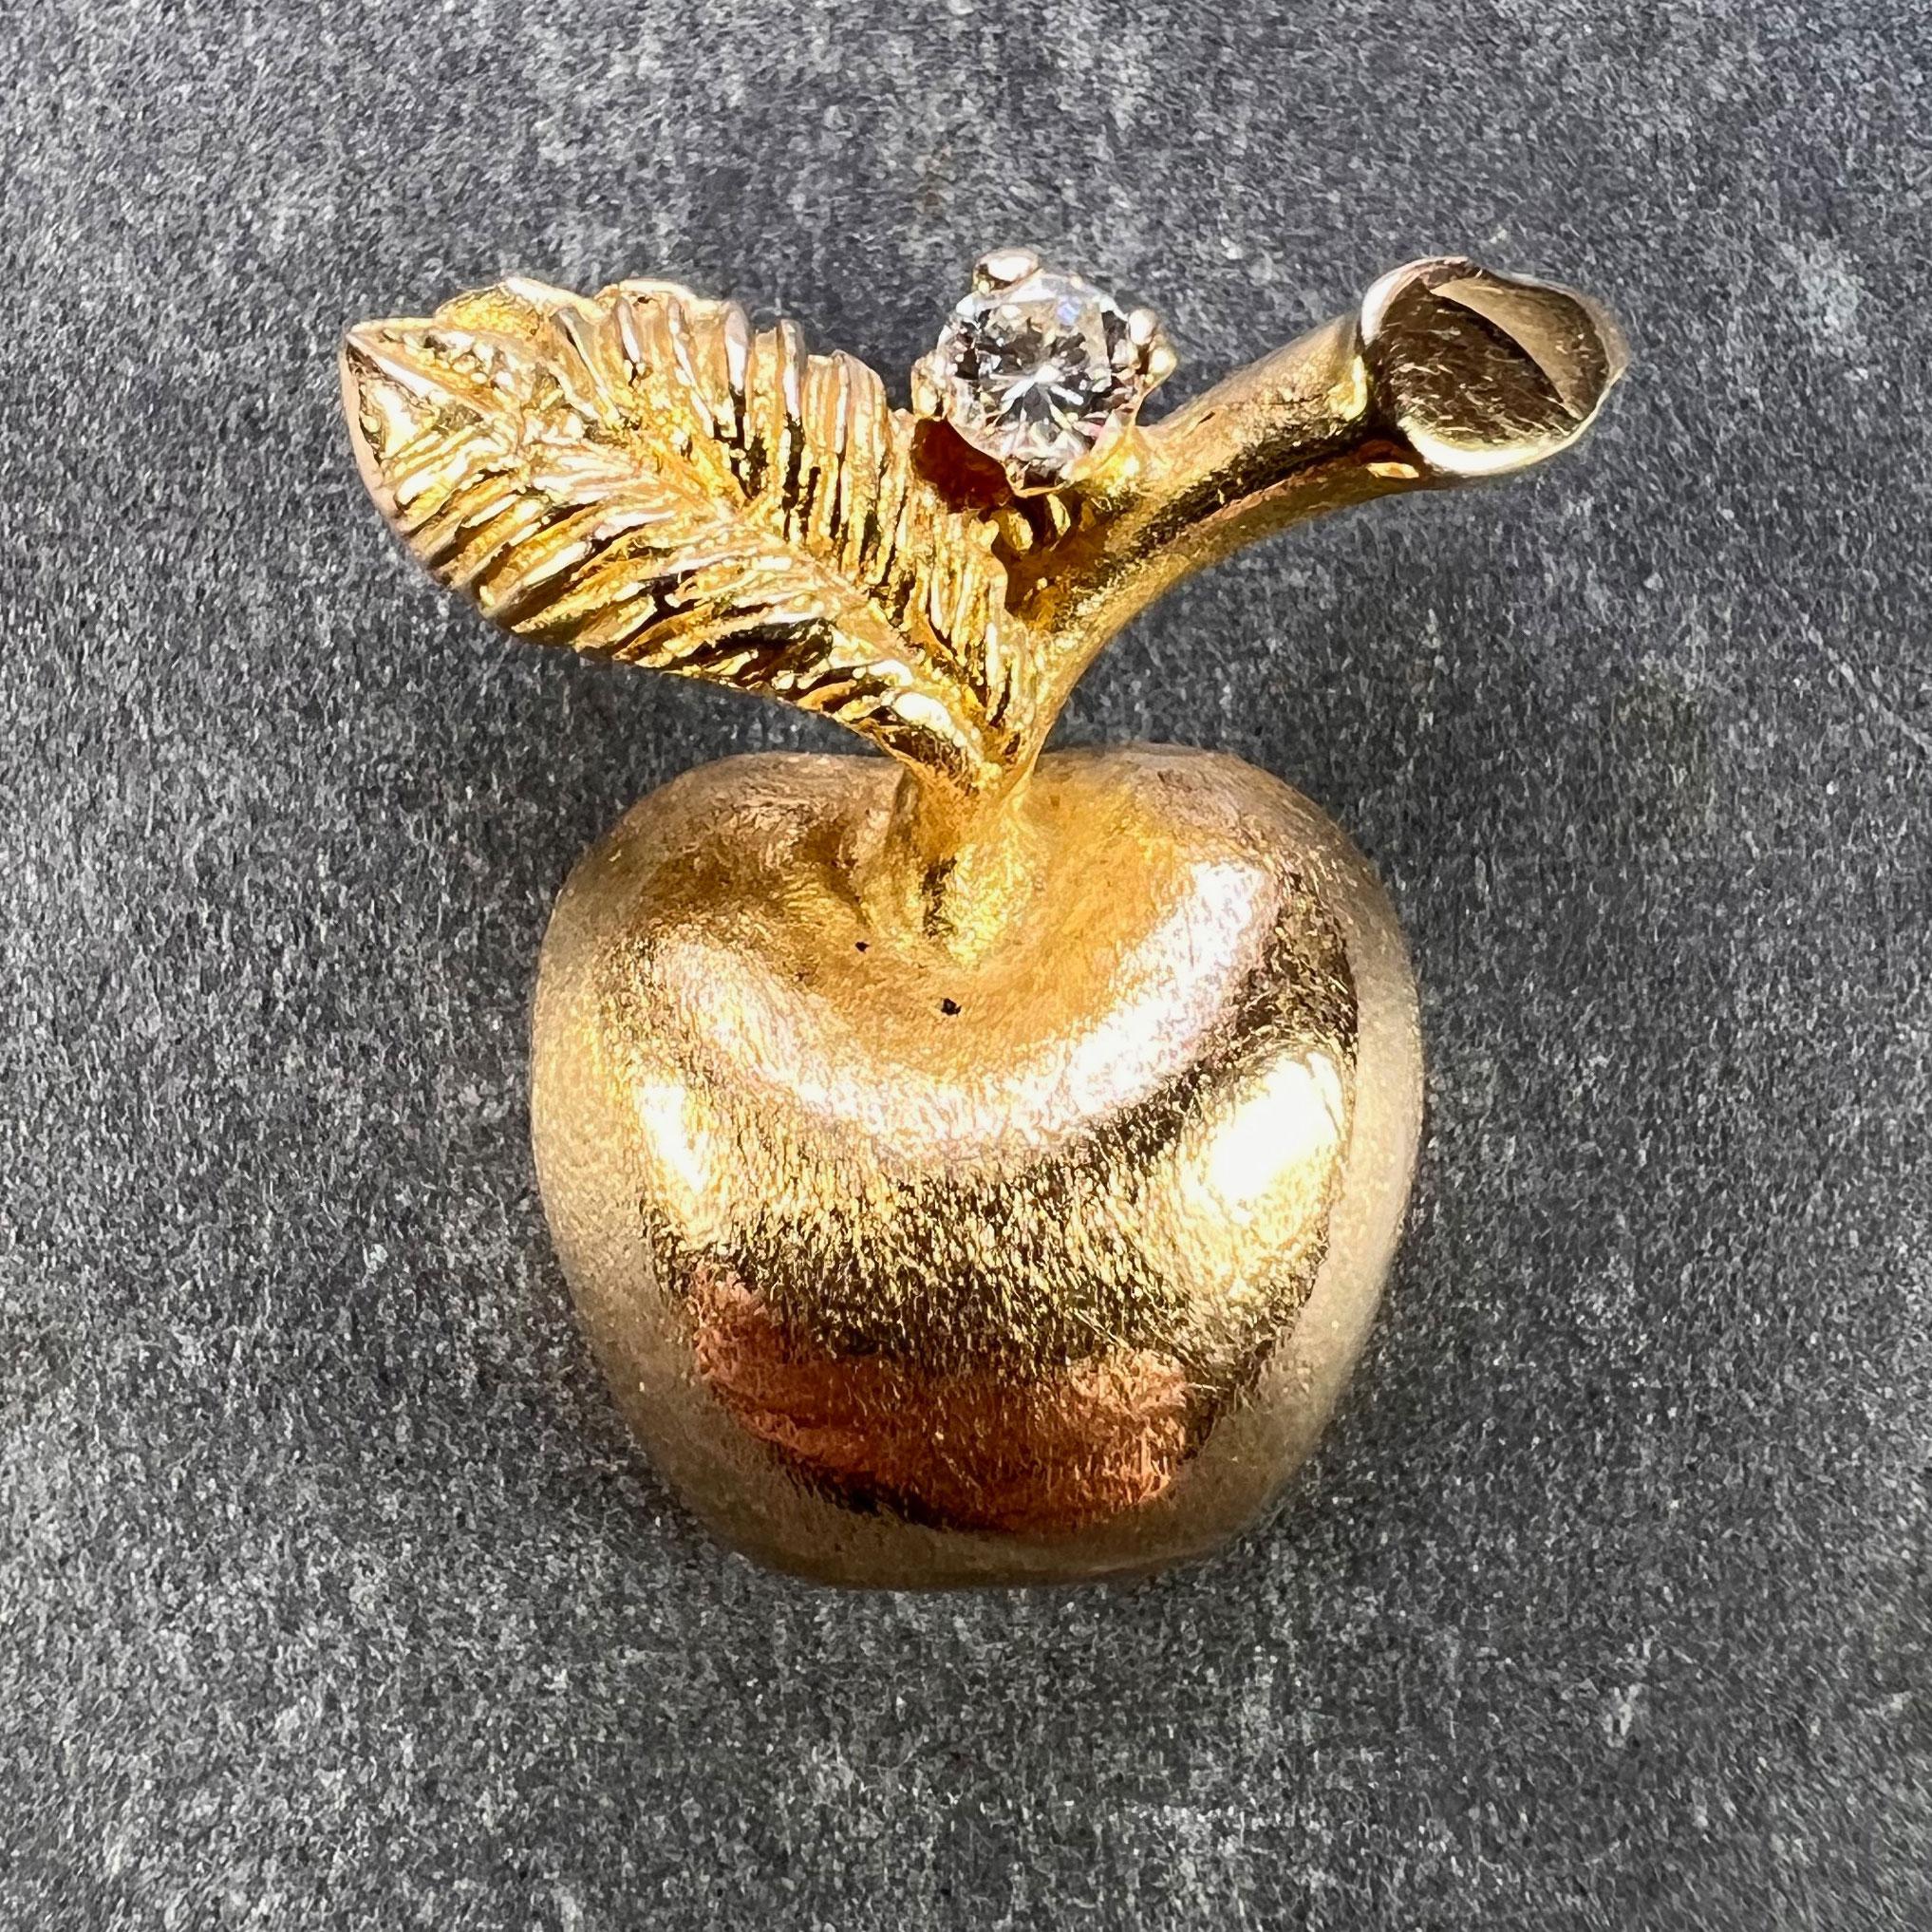 A 14 karat (14K) yellow gold fruit charm pendant designed as an apple set with a round brilliant cut diamond (approximately 0.10 carats, F-G colour, VS clarity - not unmounted for grading) to the stem. Marked 585 for 14 karat gold to the back of the